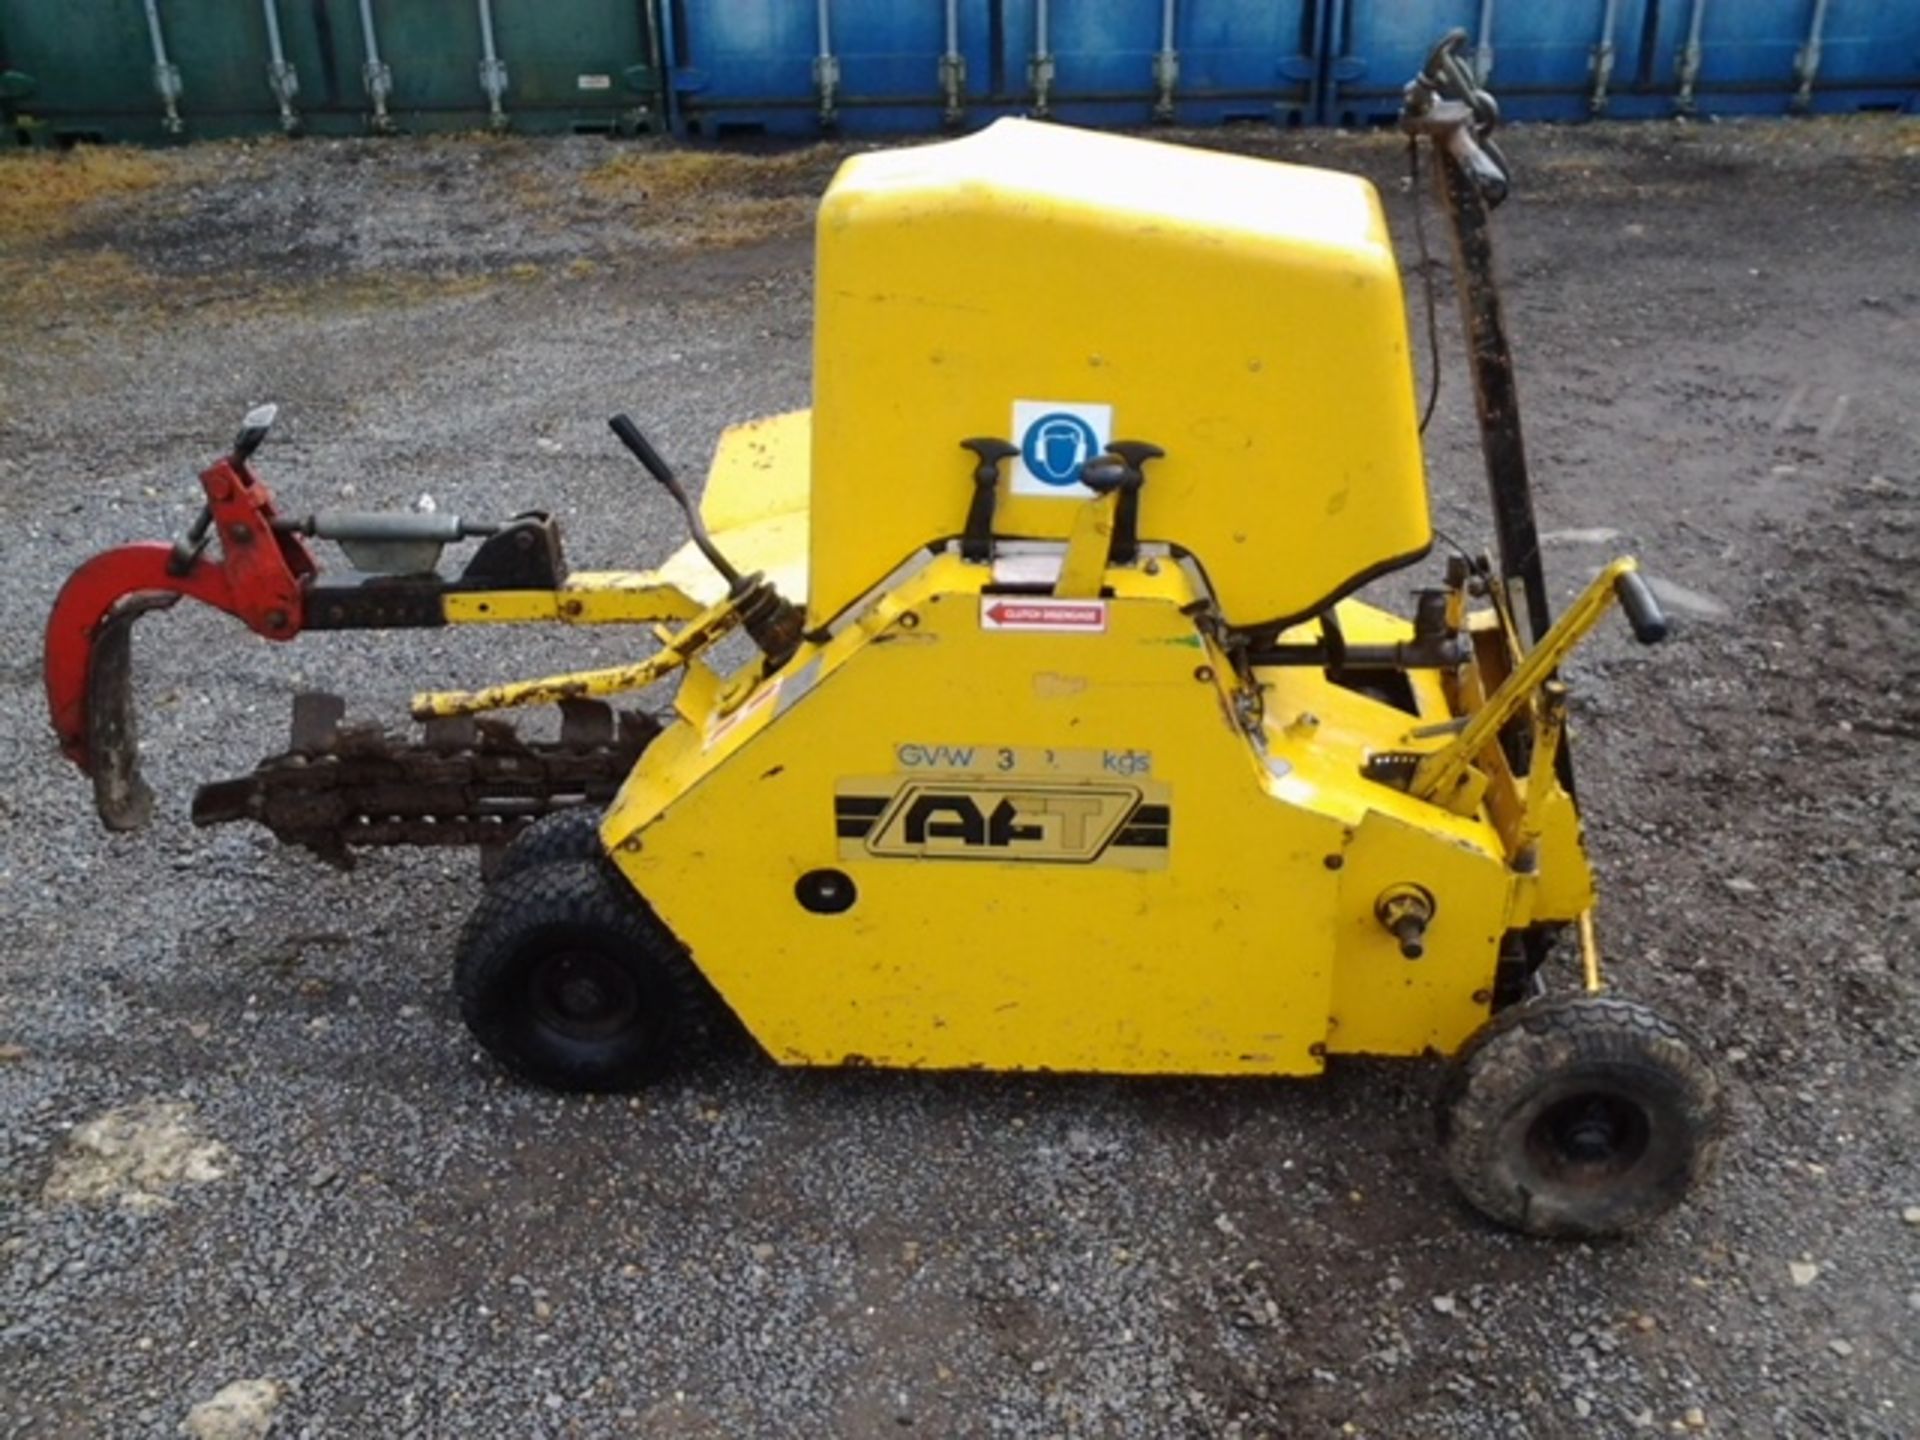 AFT F639 Pedestrian Trencher digs to 550mm depth with spoil to side of trench. Serial F2870/3...